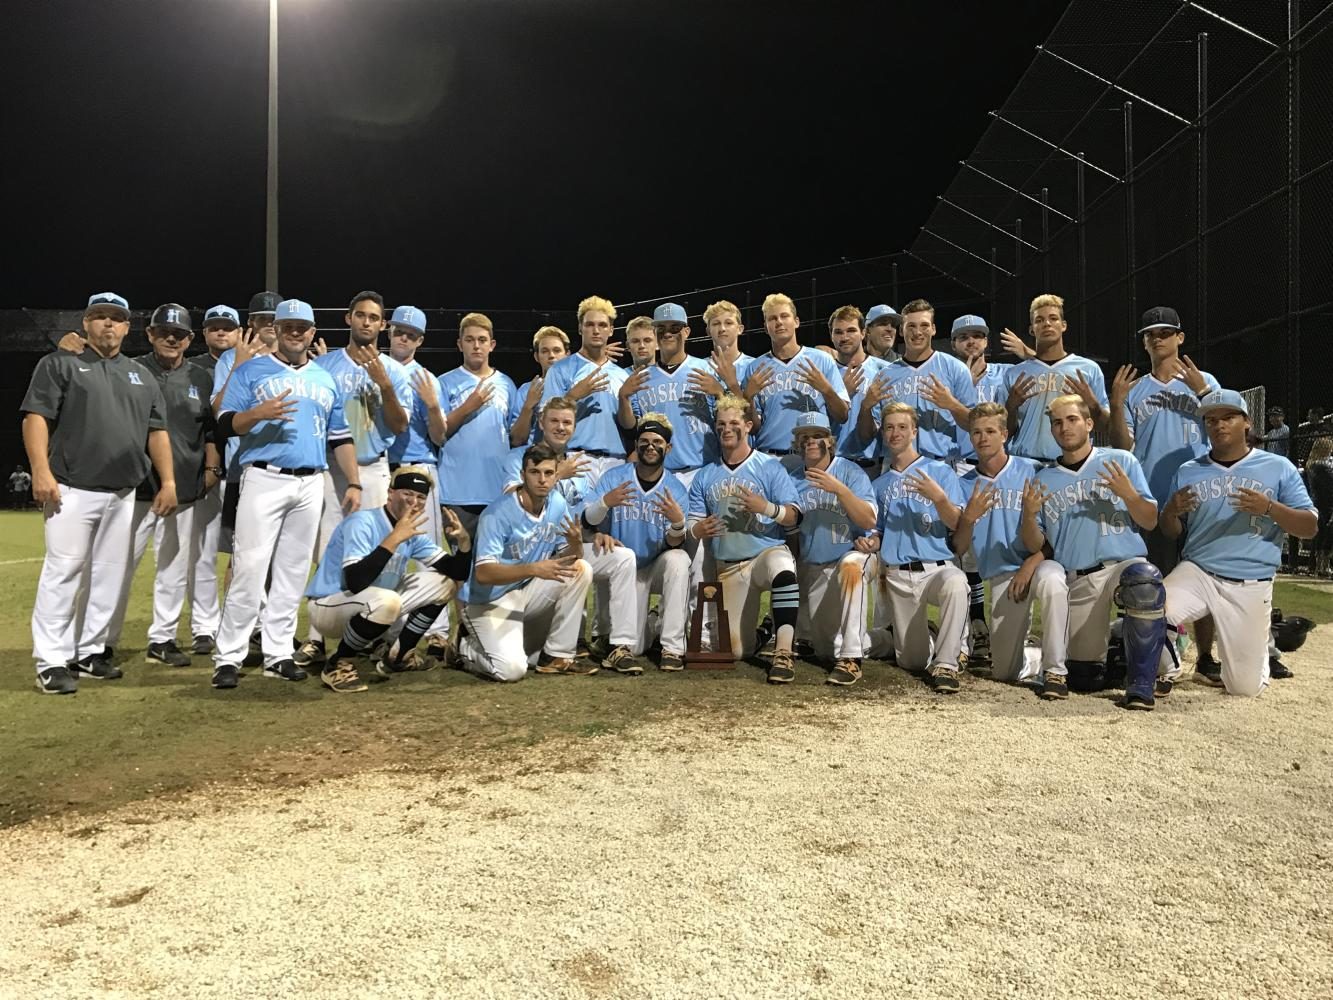 The+varsity+baseball+team+poses+with+the+district+championship+trophy.+They+beat+Lake+Howell+13-3.